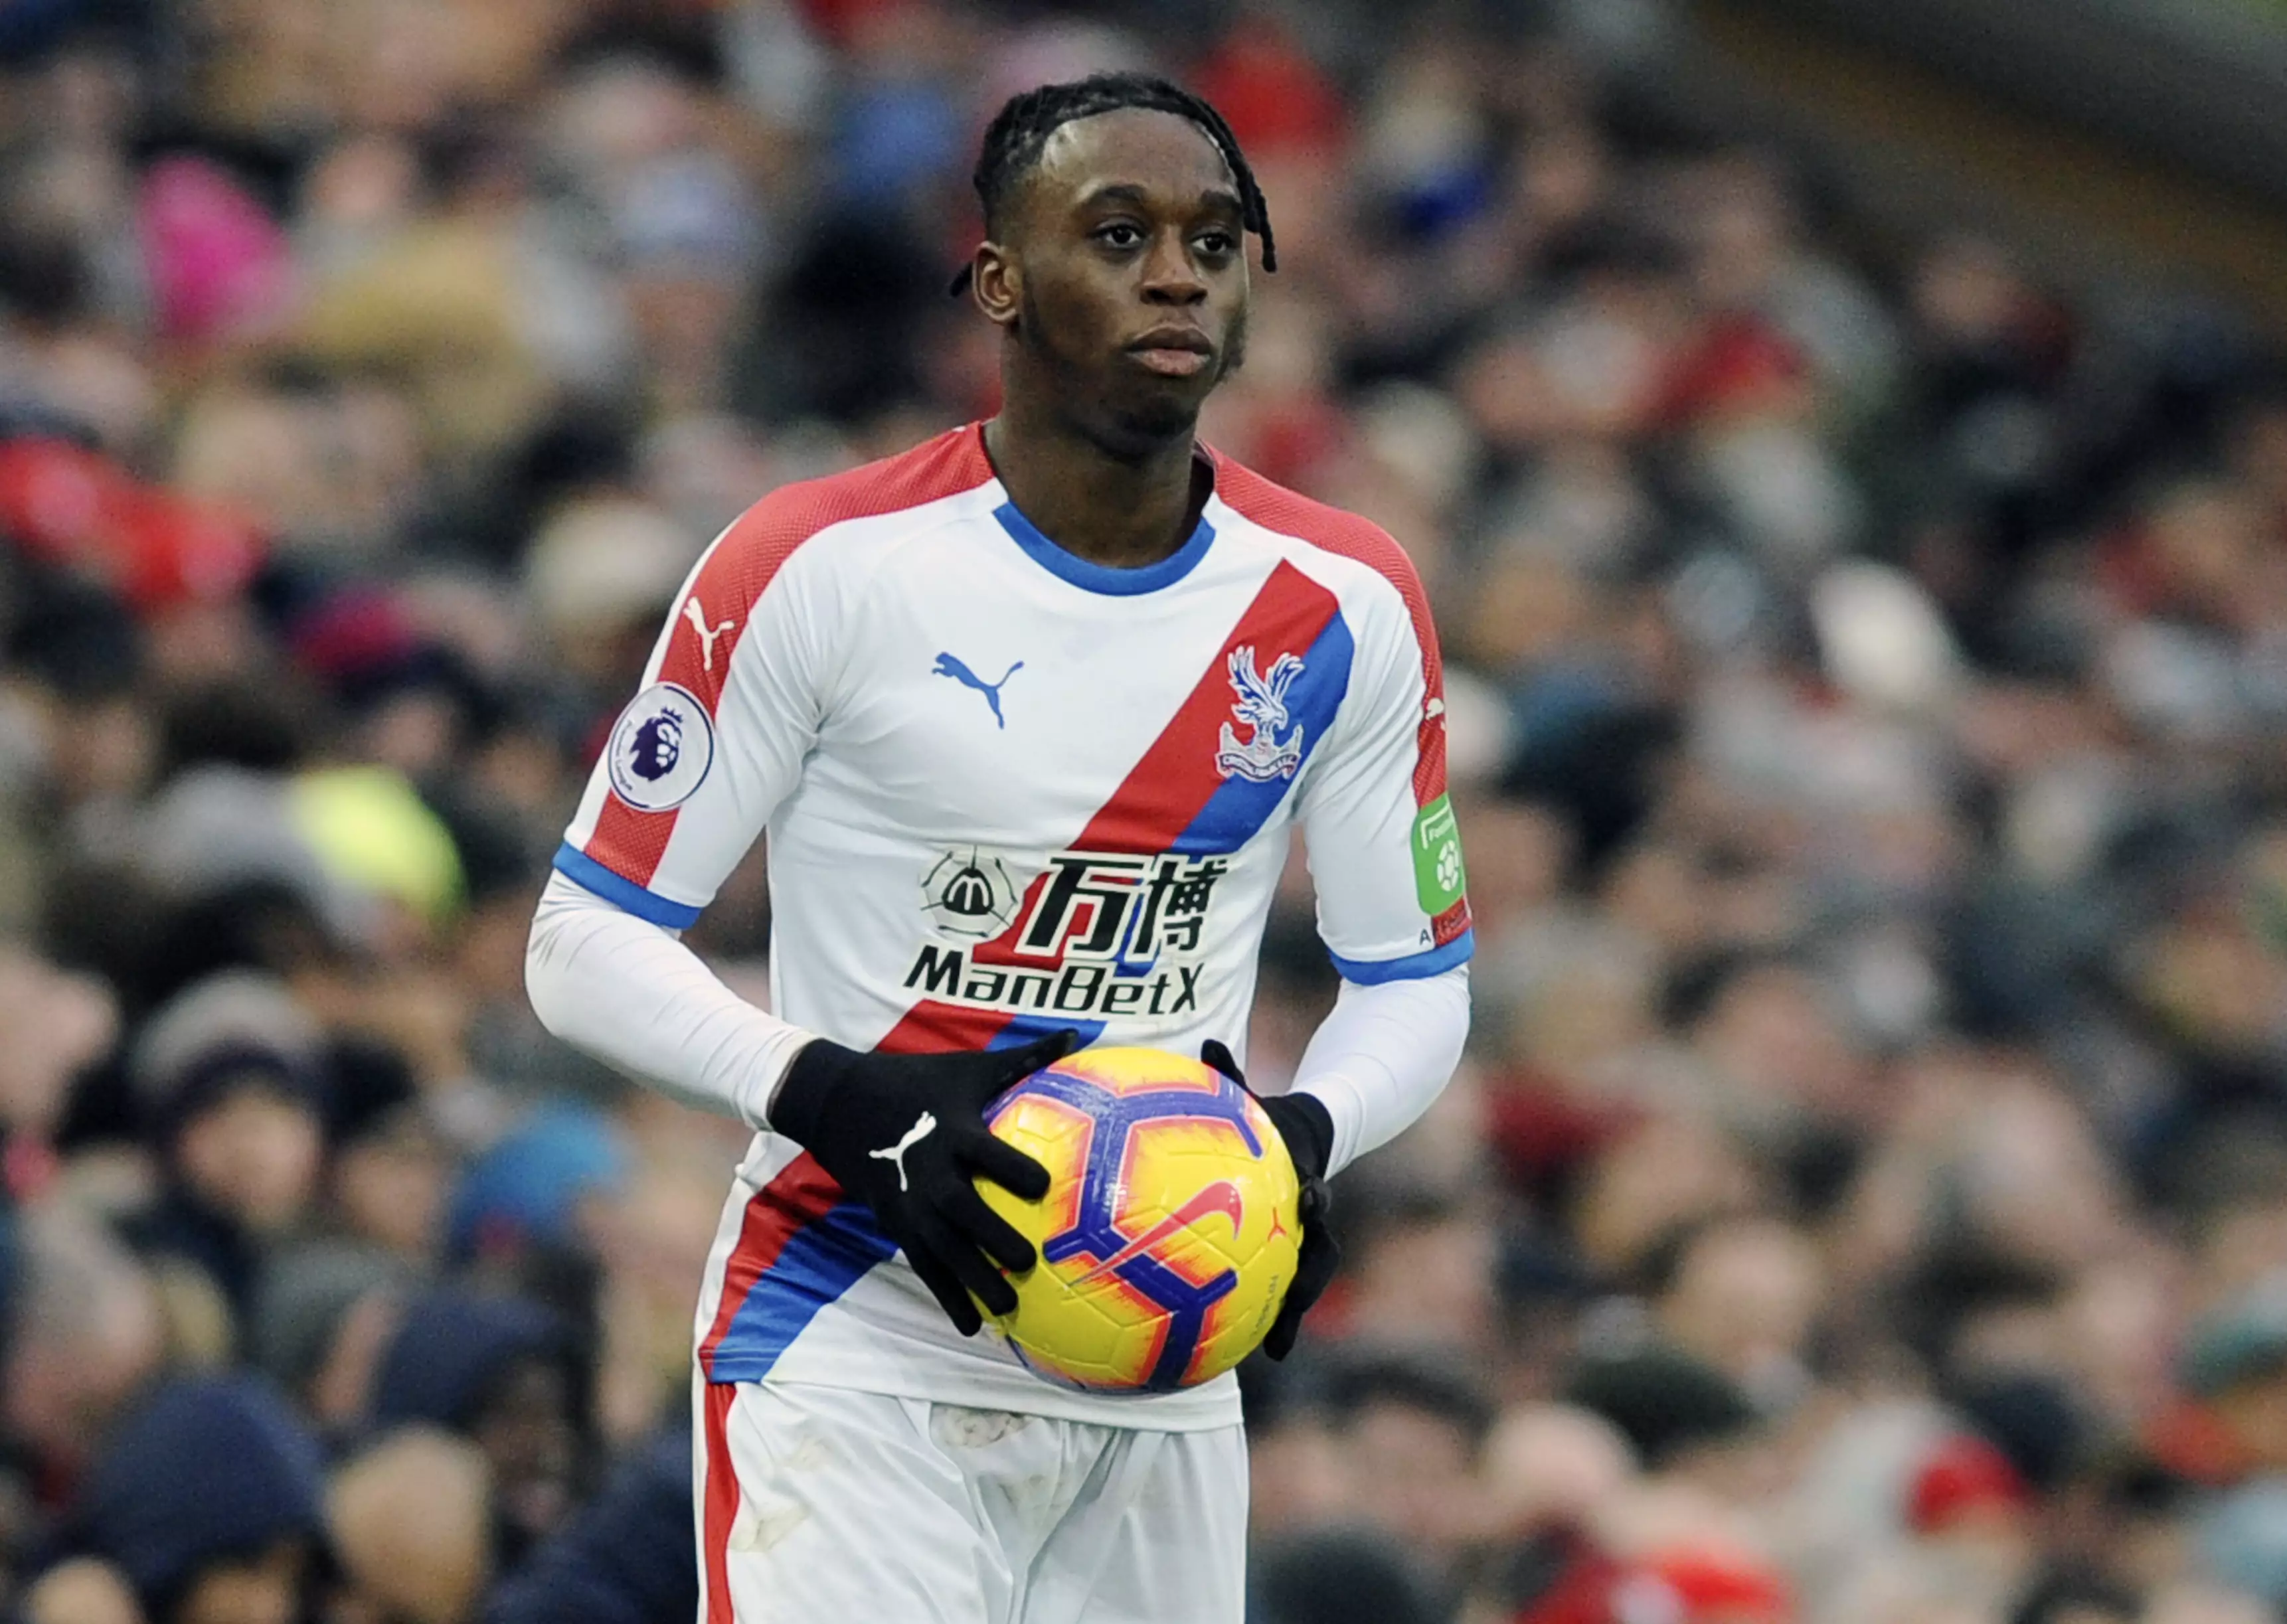 Wan-Bissaka has already left Palace this summer. Image: PA Images